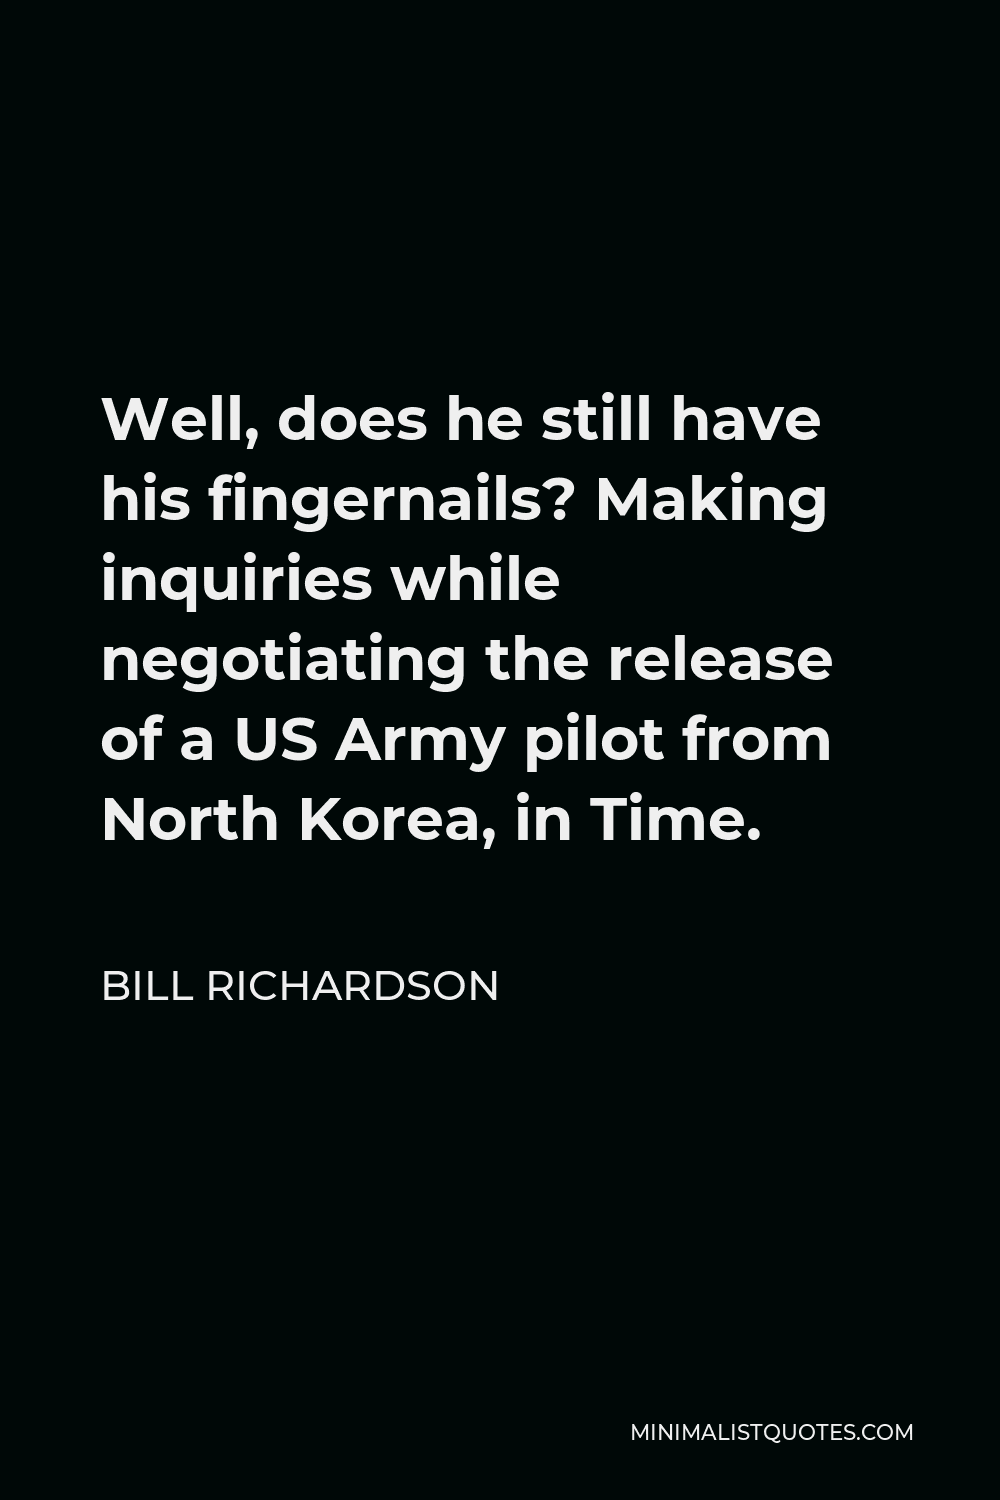 Bill Richardson Quote - Well, does he still have his fingernails? Making inquiries while negotiating the release of a US Army pilot from North Korea, in Time.